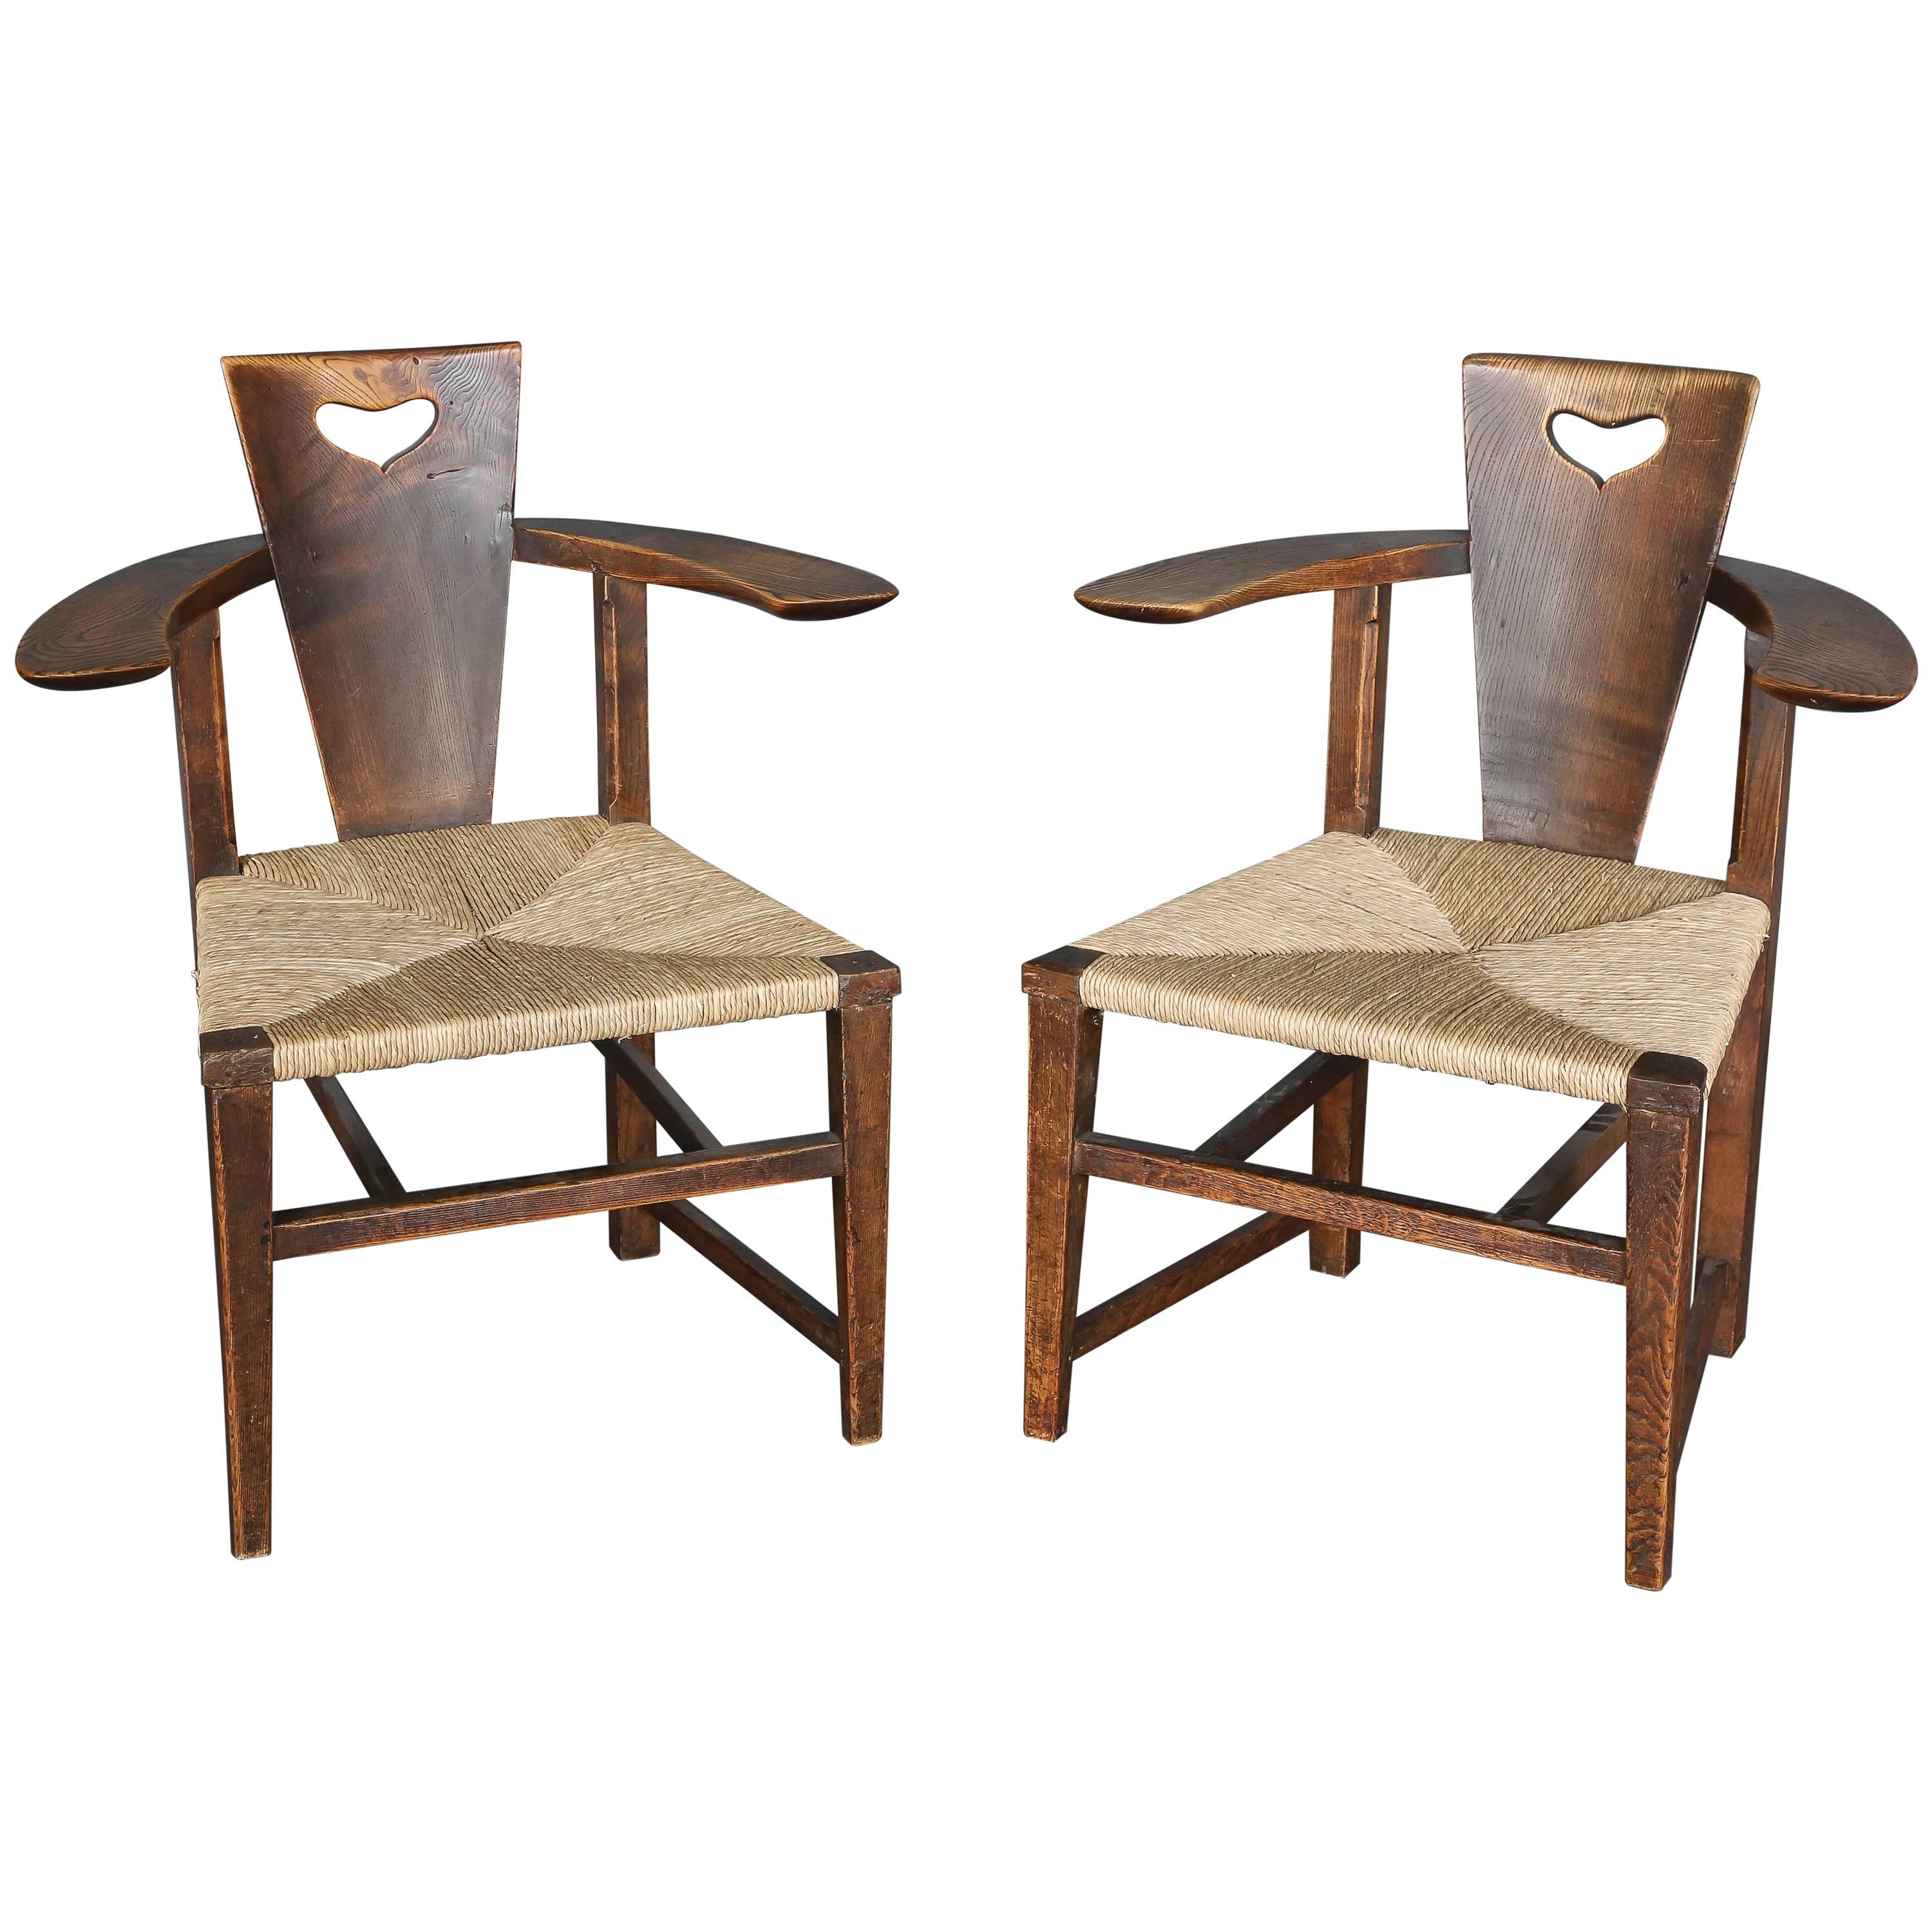 Antique 19th Century Ash Abingwood Chairs by George Walton For Sale